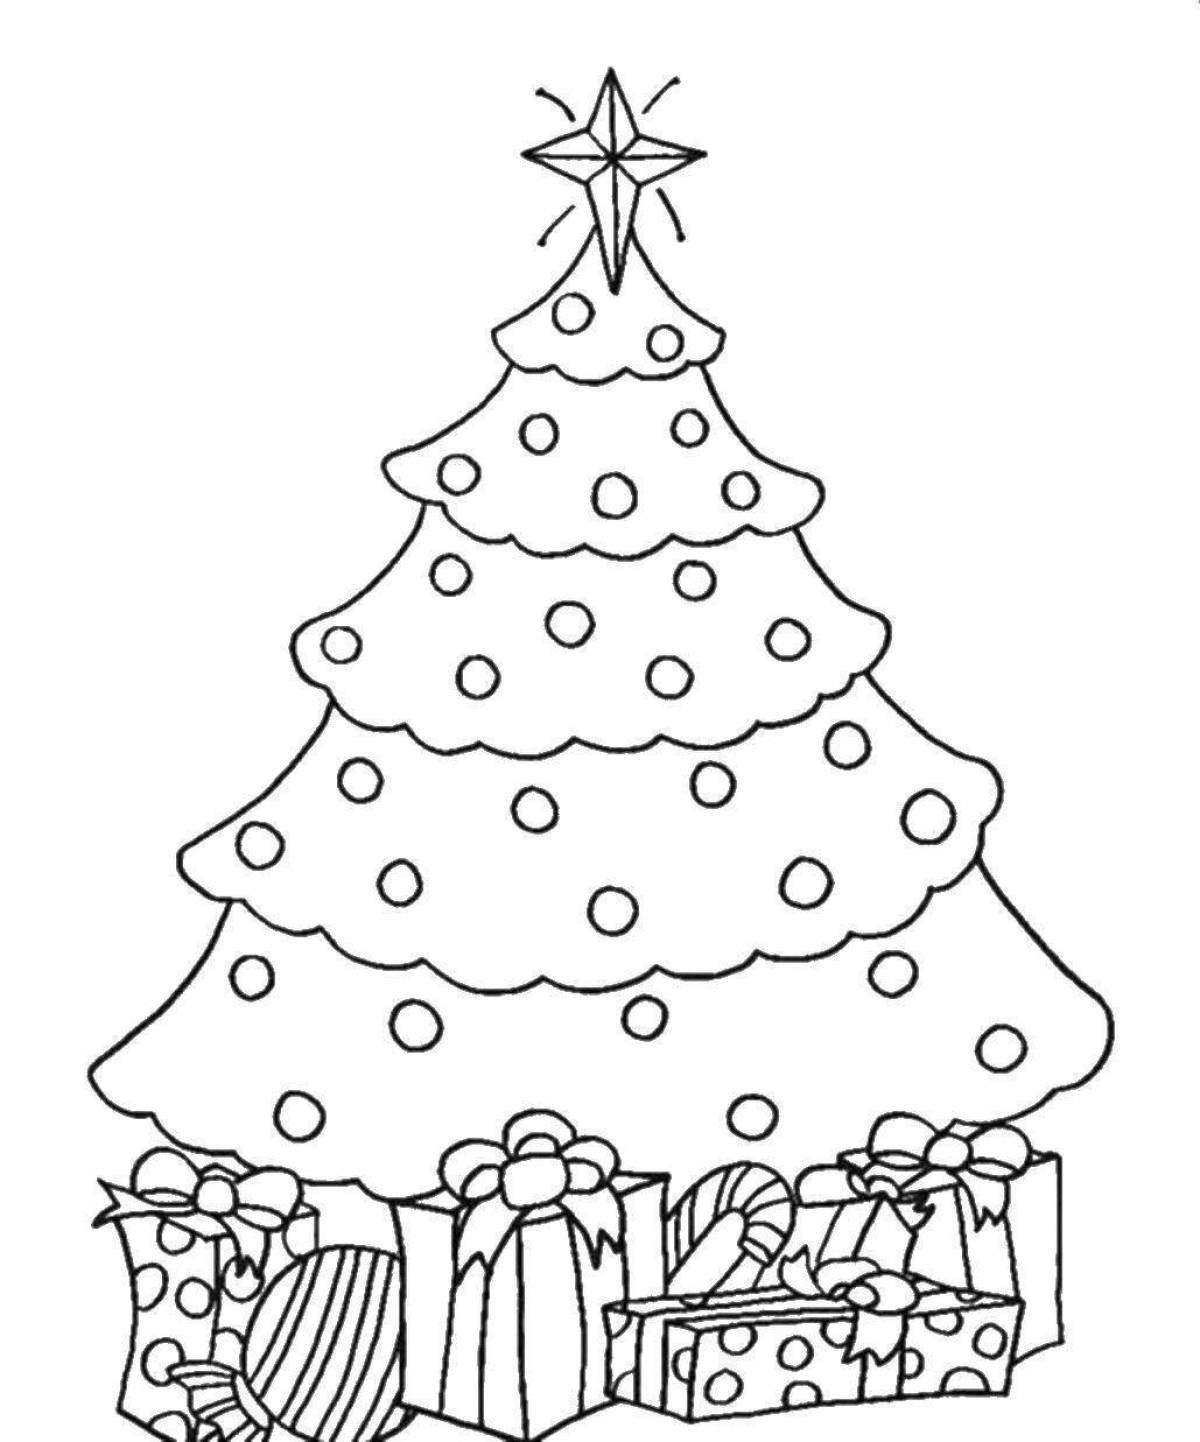 Coloring fat Christmas tree